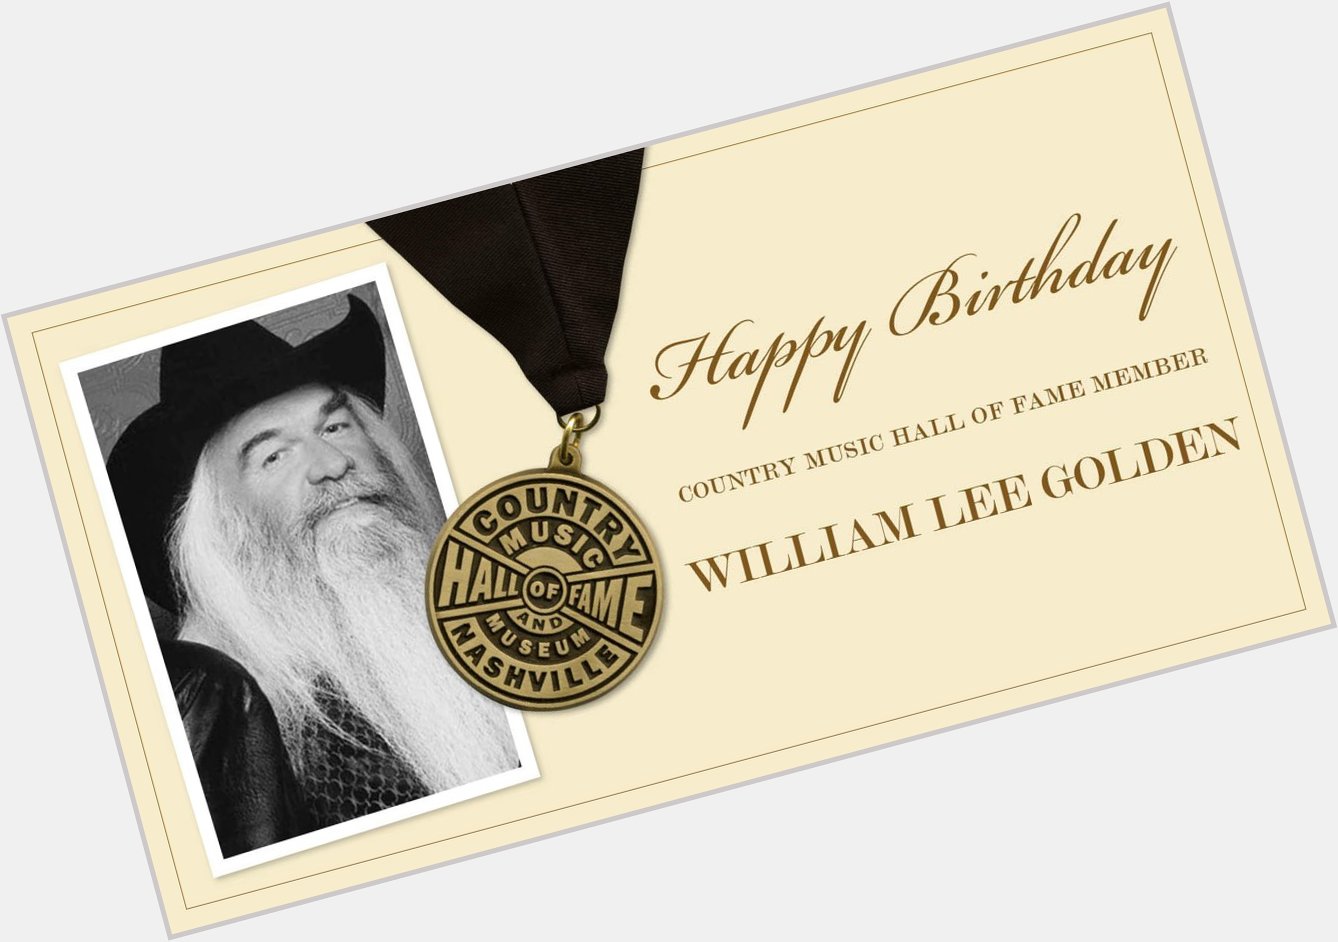 Help us wish Country Music Hall of Fame and member William Lee Golden a very Happy Birthday! 